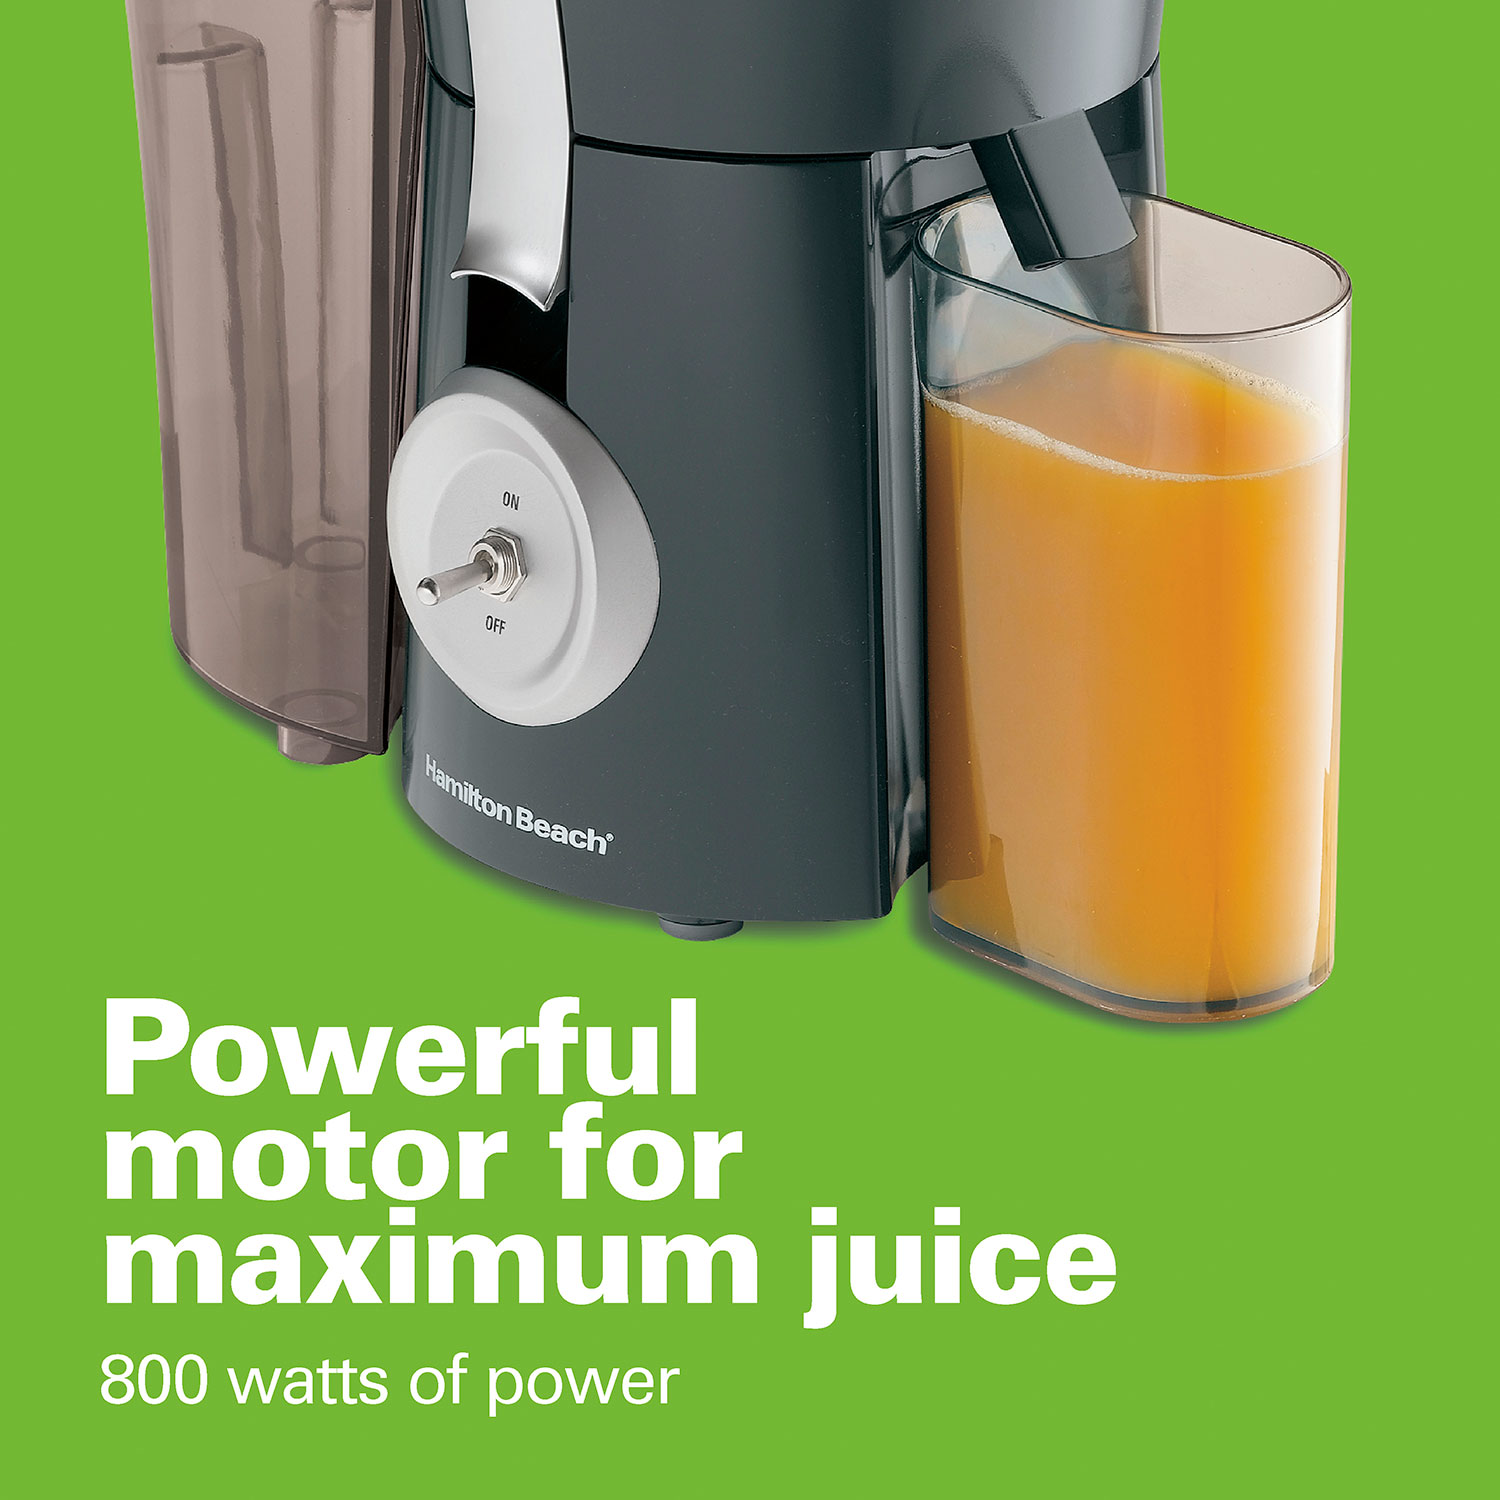 Hamilton Beach CJ14 Big Mouth Juice Extractor Juicer Black Stainless 67608  T